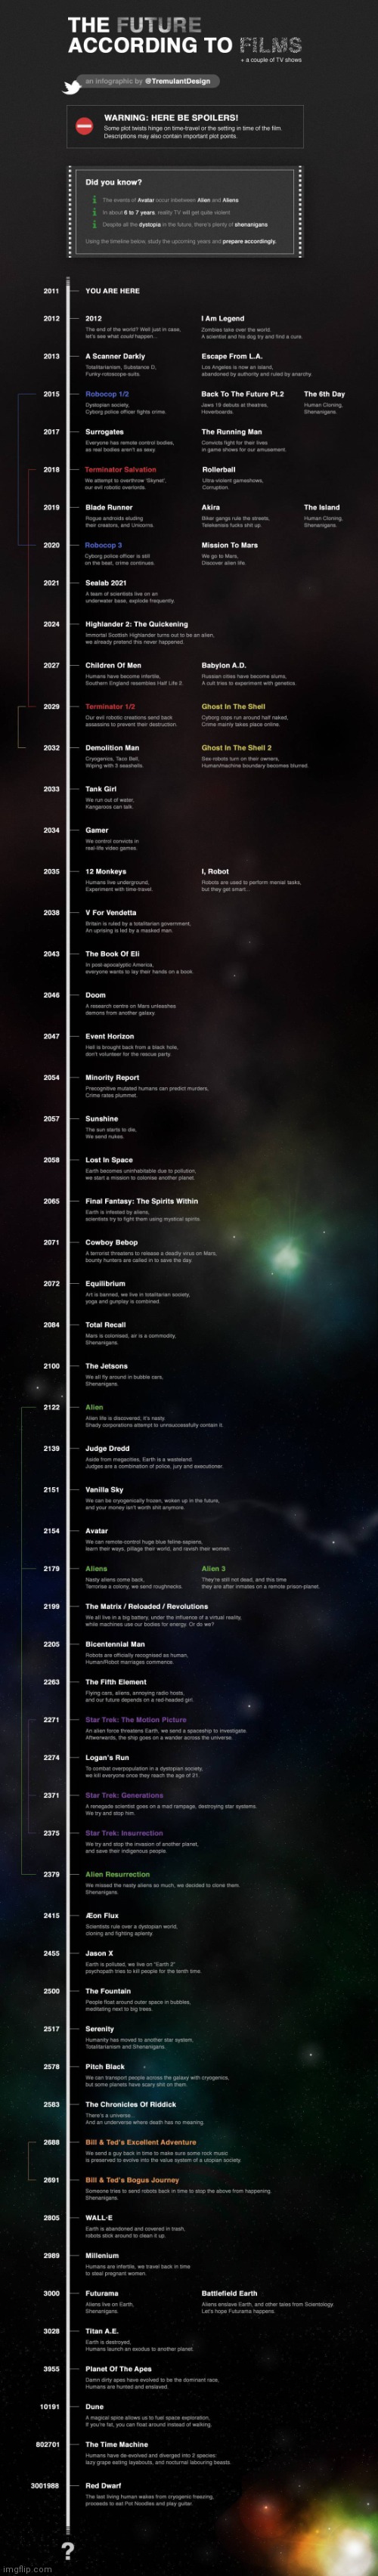 The Future According To Films (2011 Onwards) | image tagged in sci-fi,movies,future | made w/ Imgflip meme maker